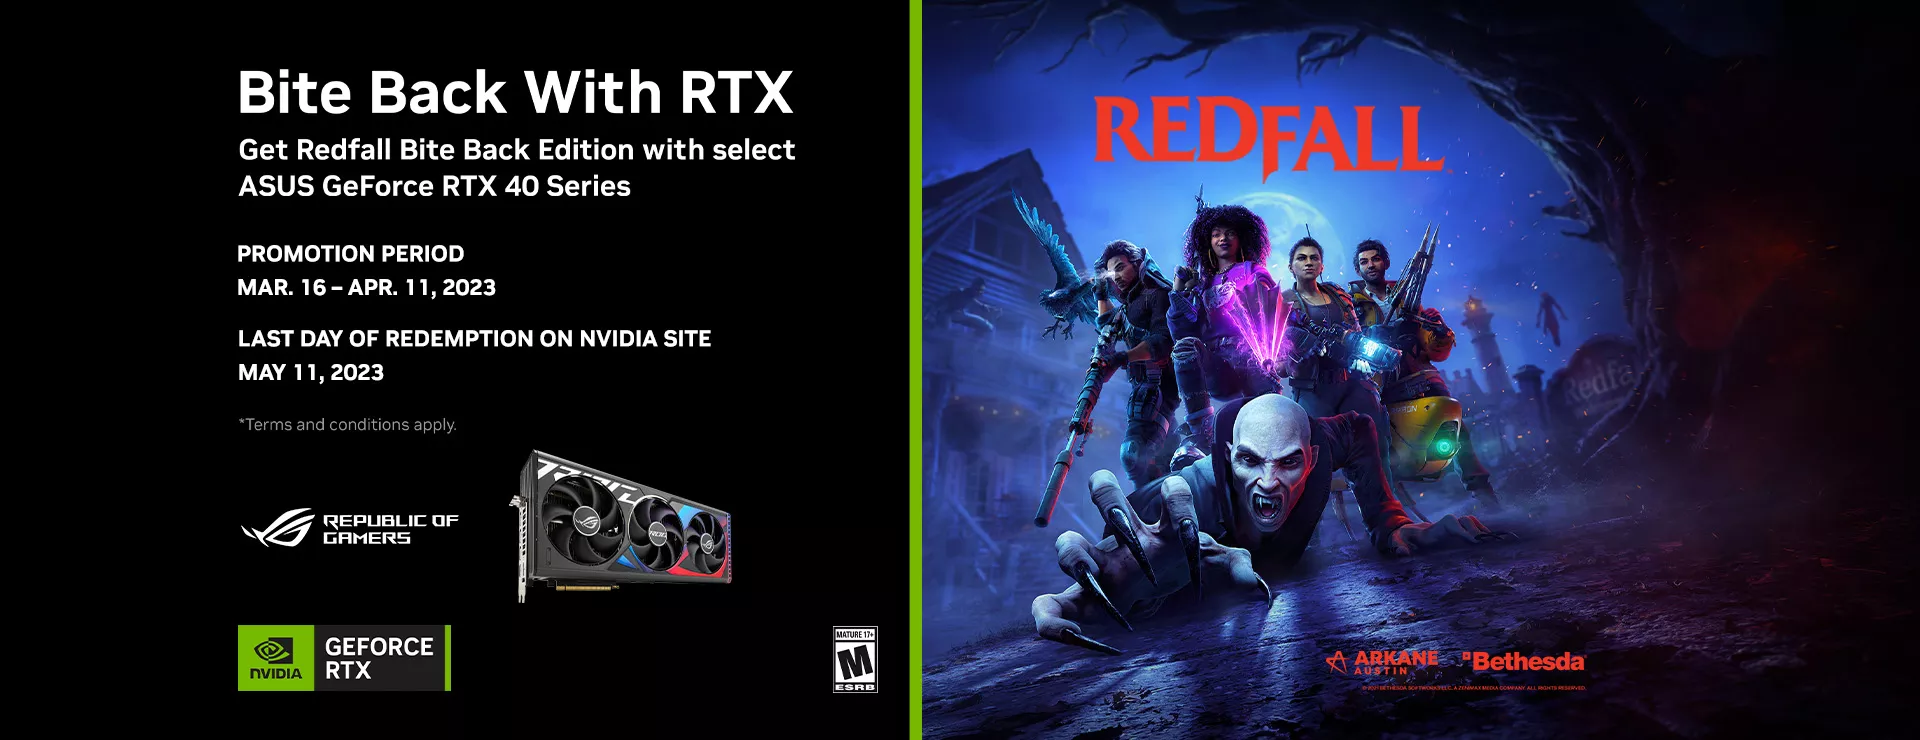 NVIDIA Redfall Game Bundle Banner with ROG Strix RTX 4090